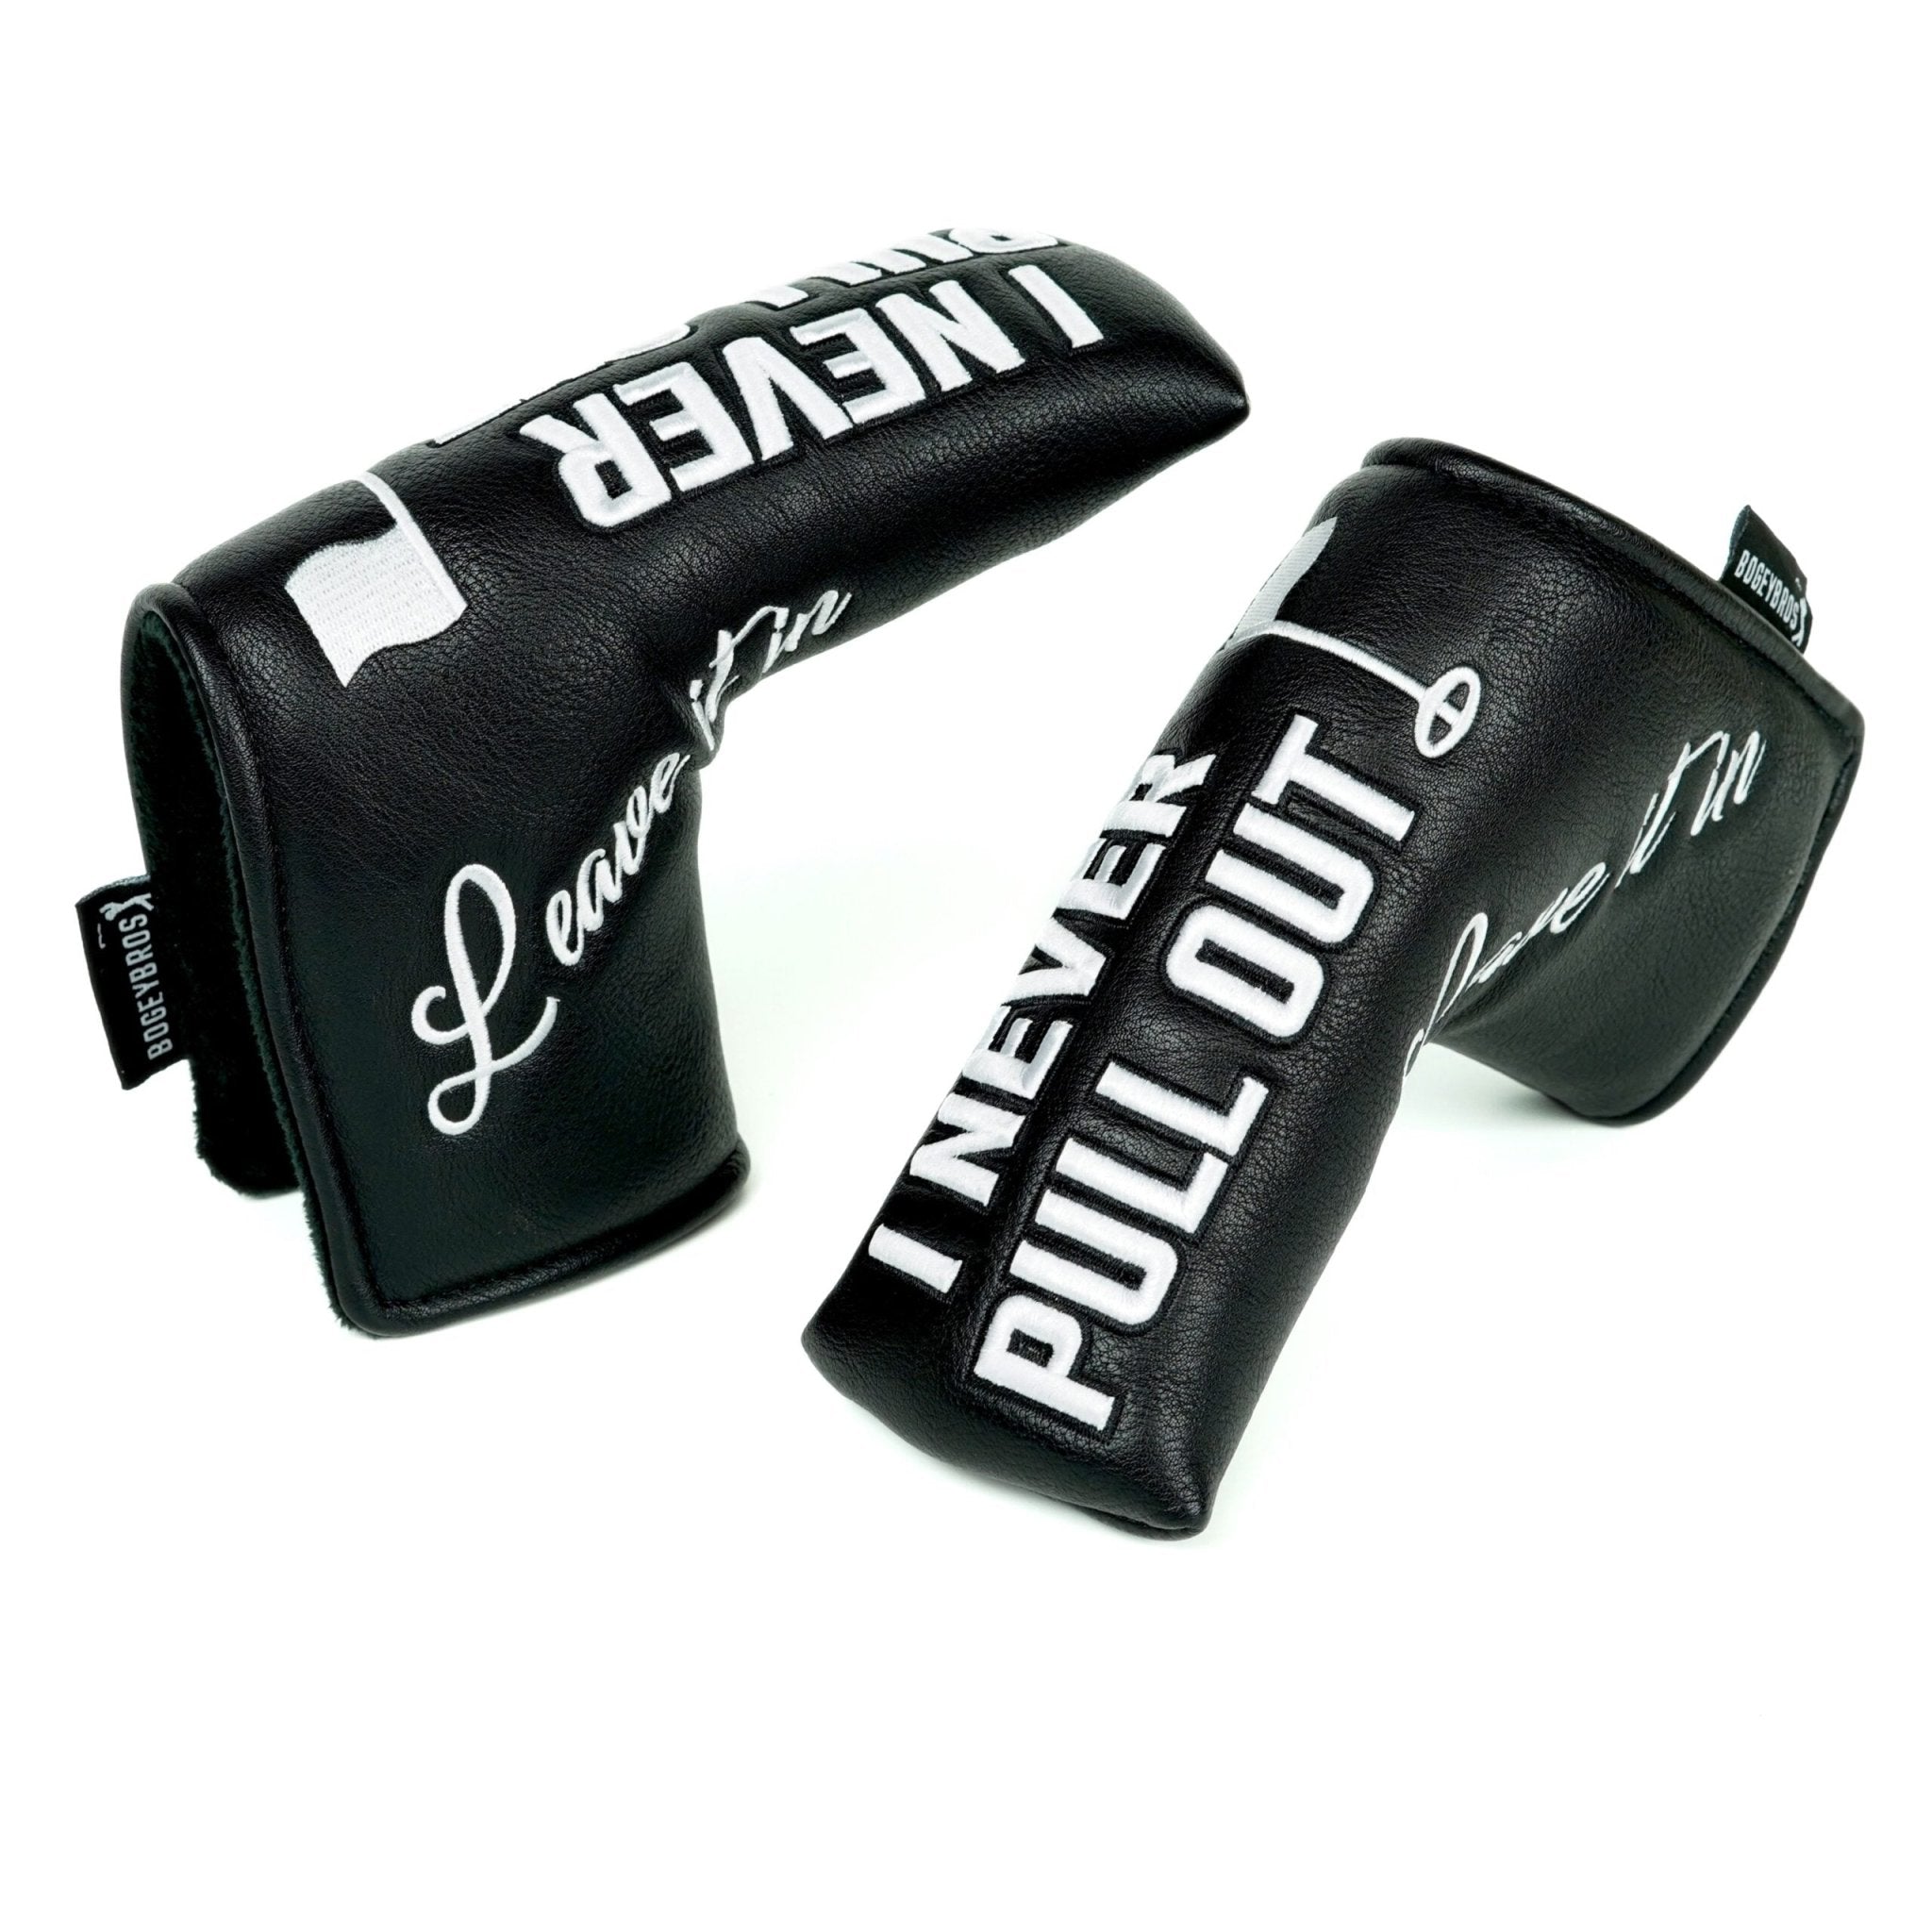 I NEVER PULL OUT - Blade Putter Headcover - bogeybros-new